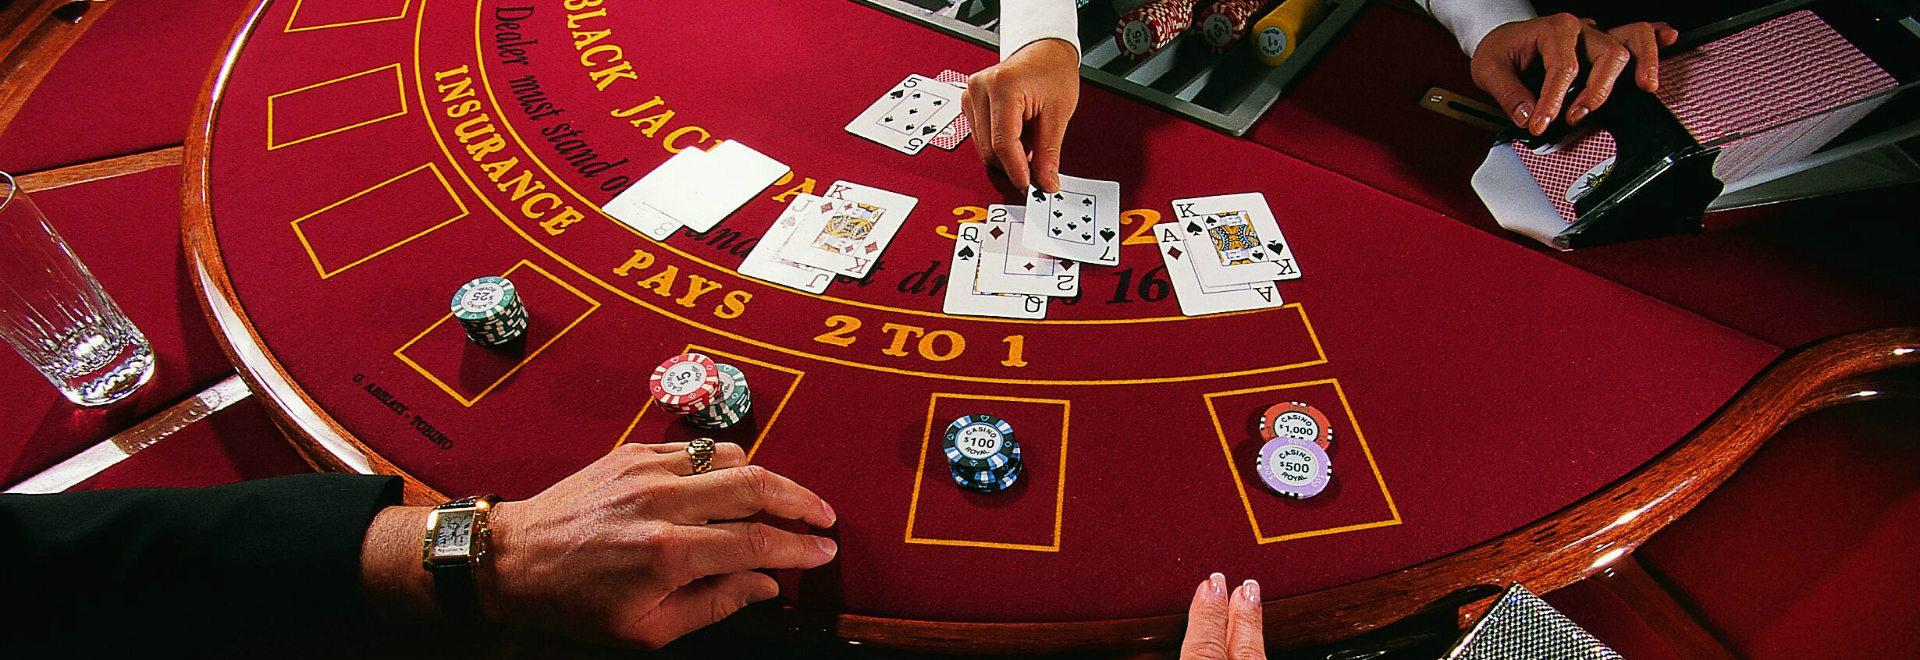 5 Things People Hate About casino FairSpin